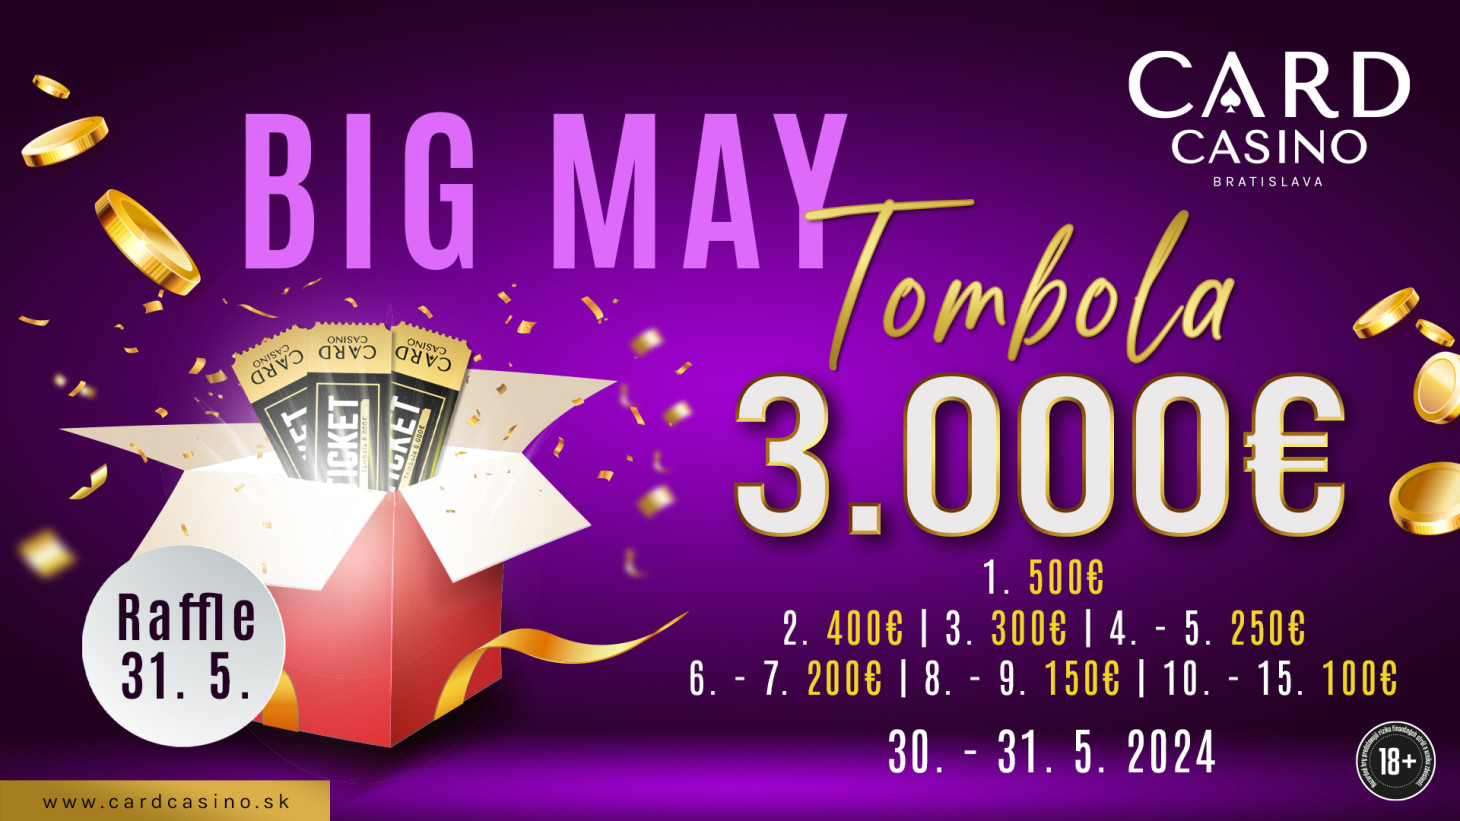 Get ready for a big 3.000€ Raffle at the end of May